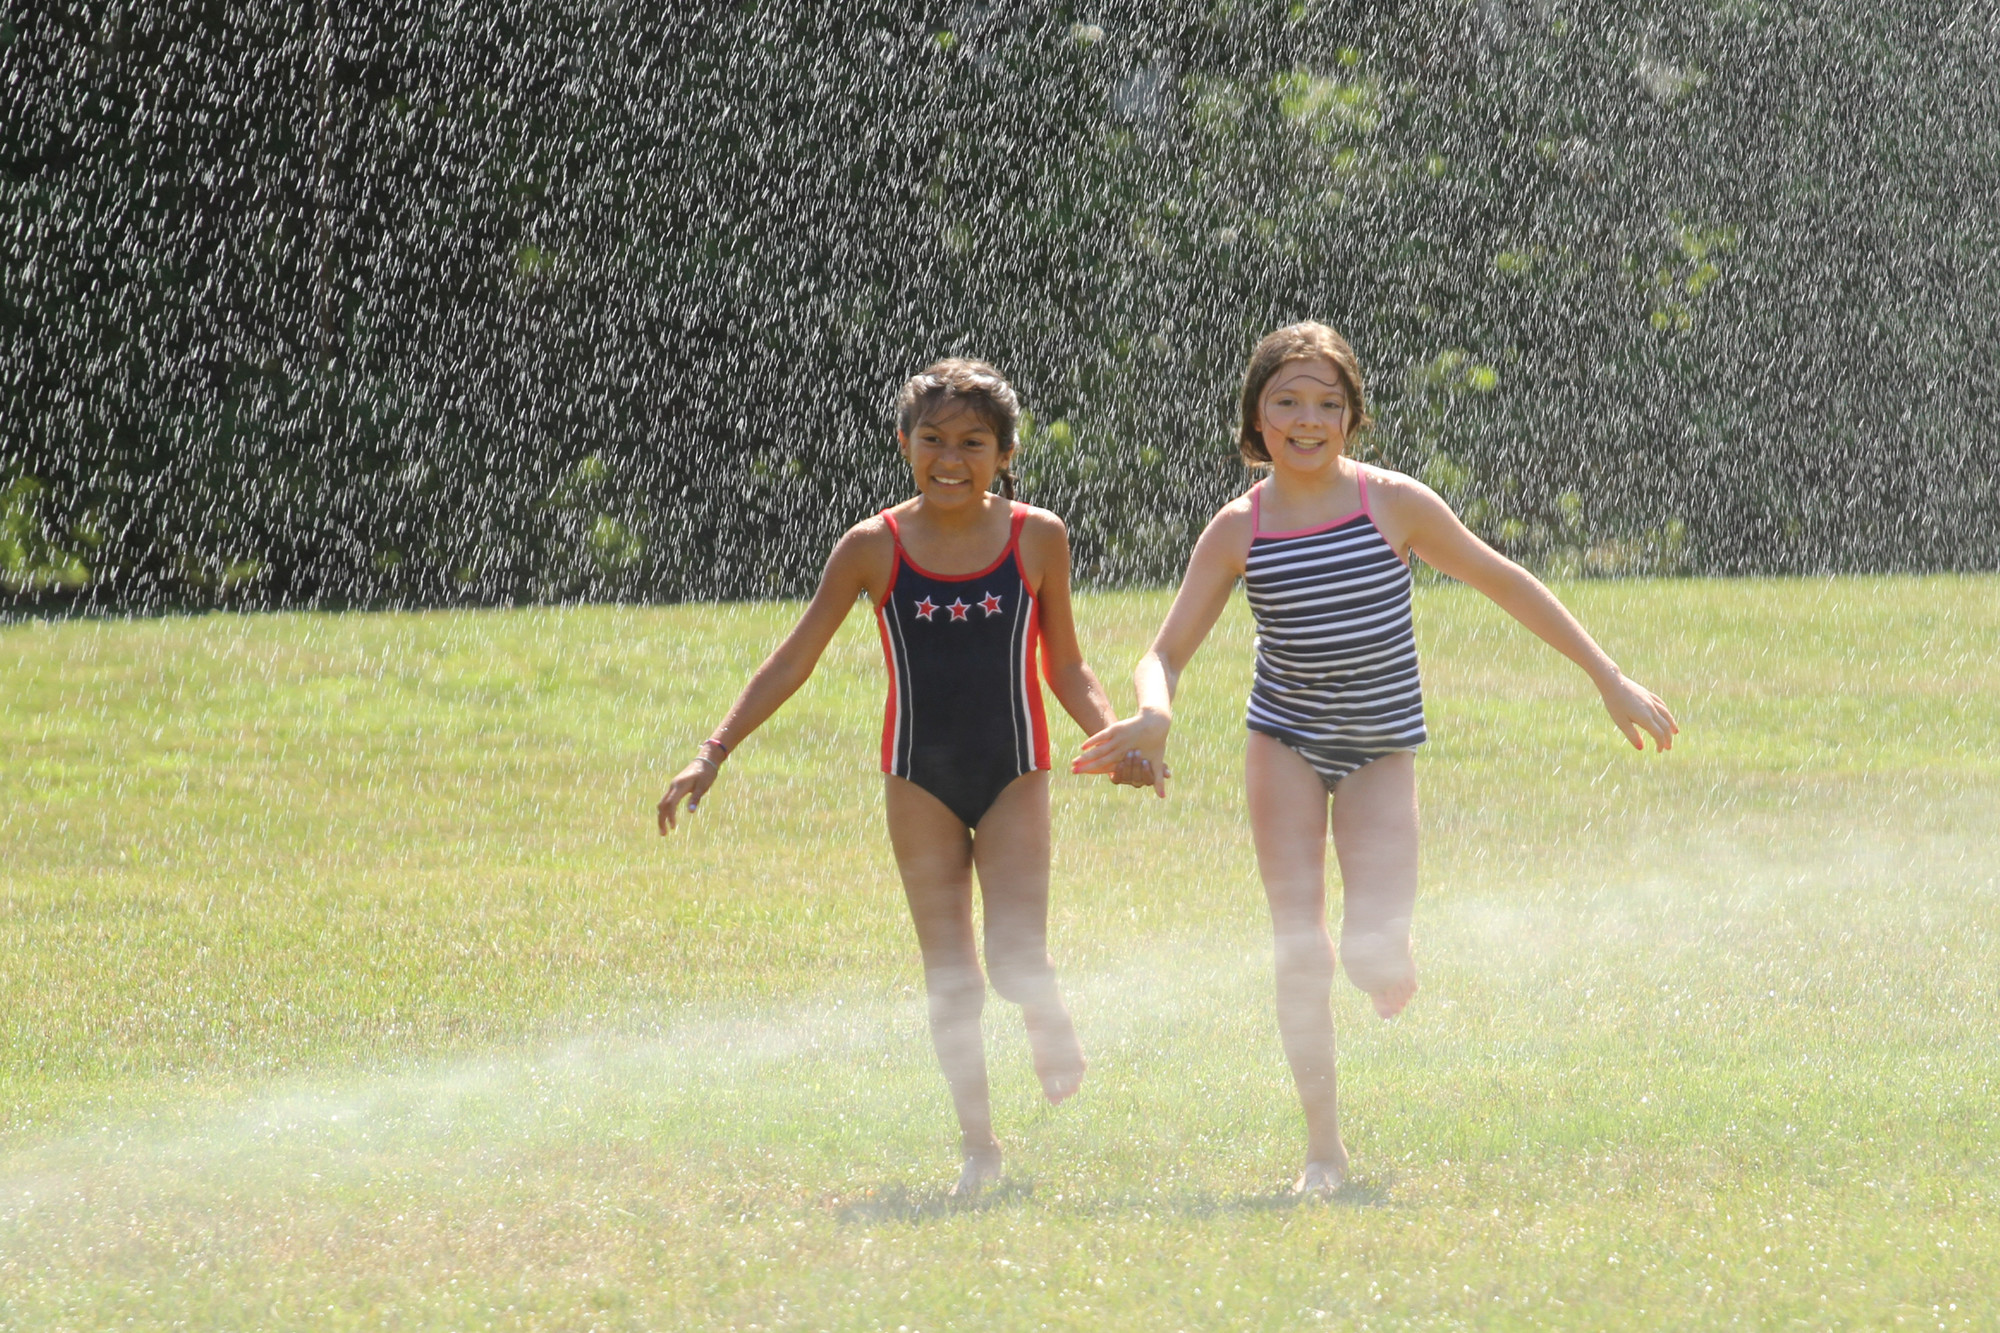 Ana Patchke and Kaitlin Sullivan ran through sprinklers at the Rec Center last Friday to cool off on a hot summer day.